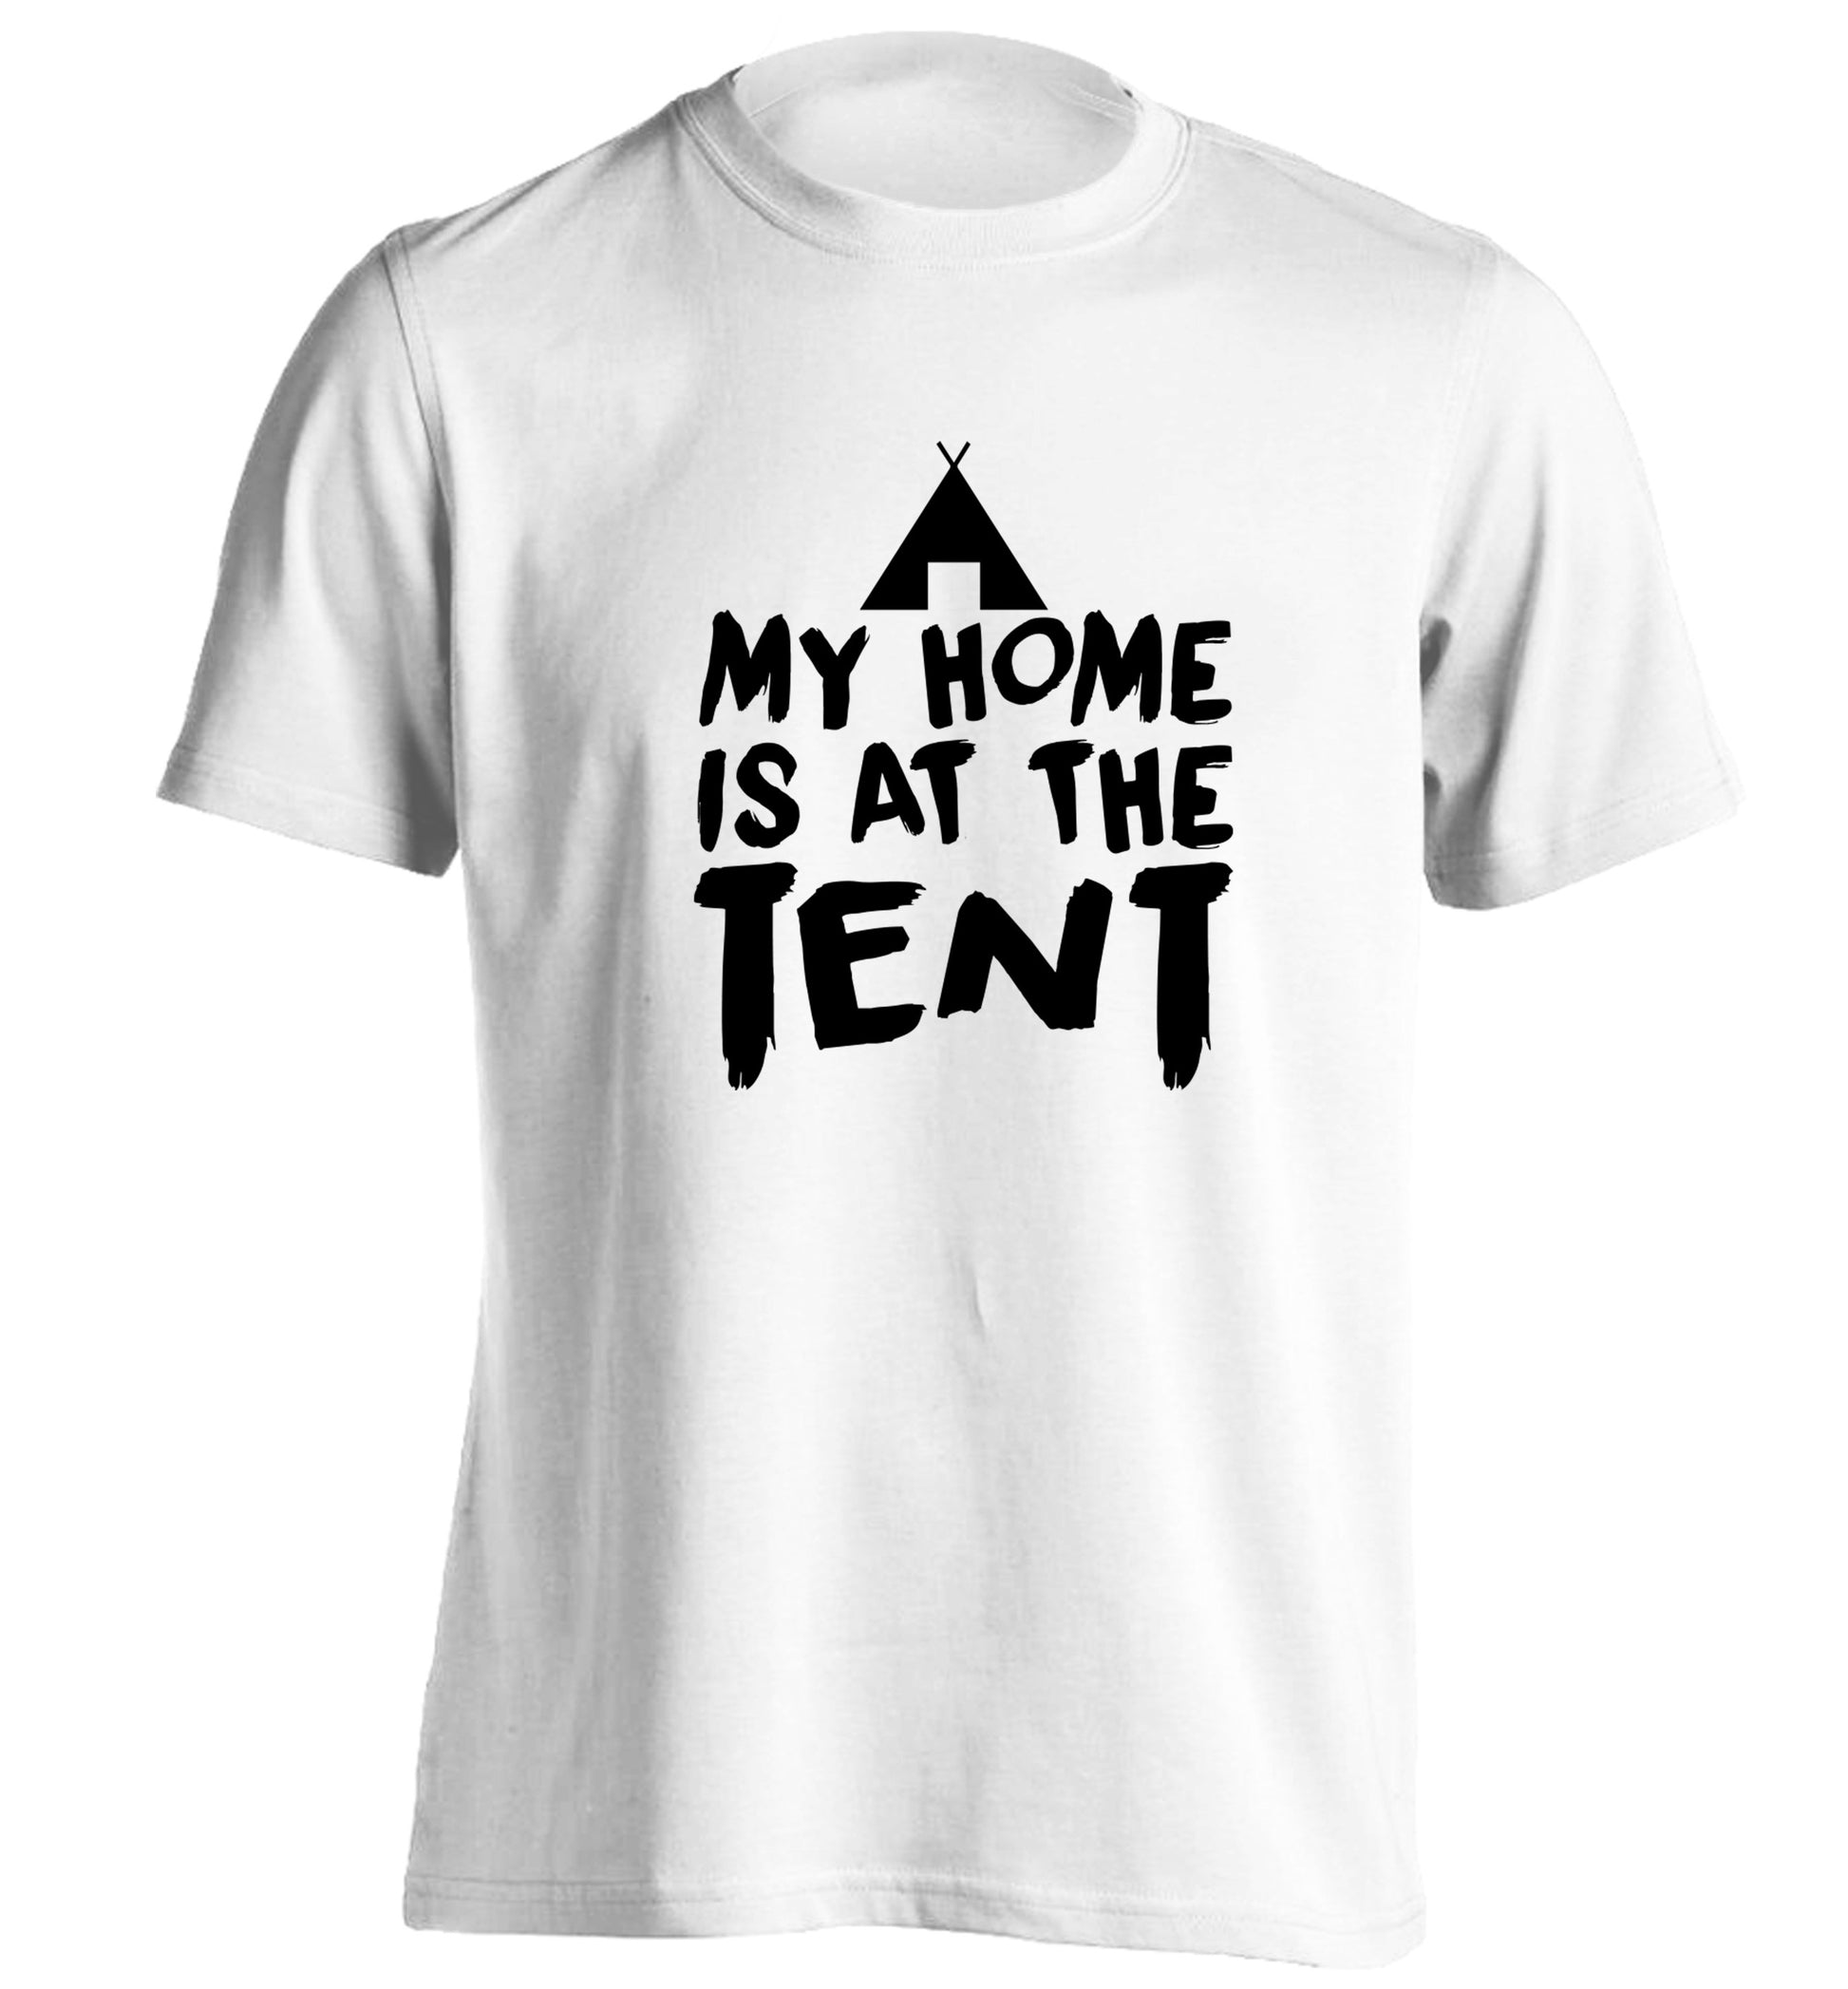 My home is at the tent adults unisex white Tshirt 2XL